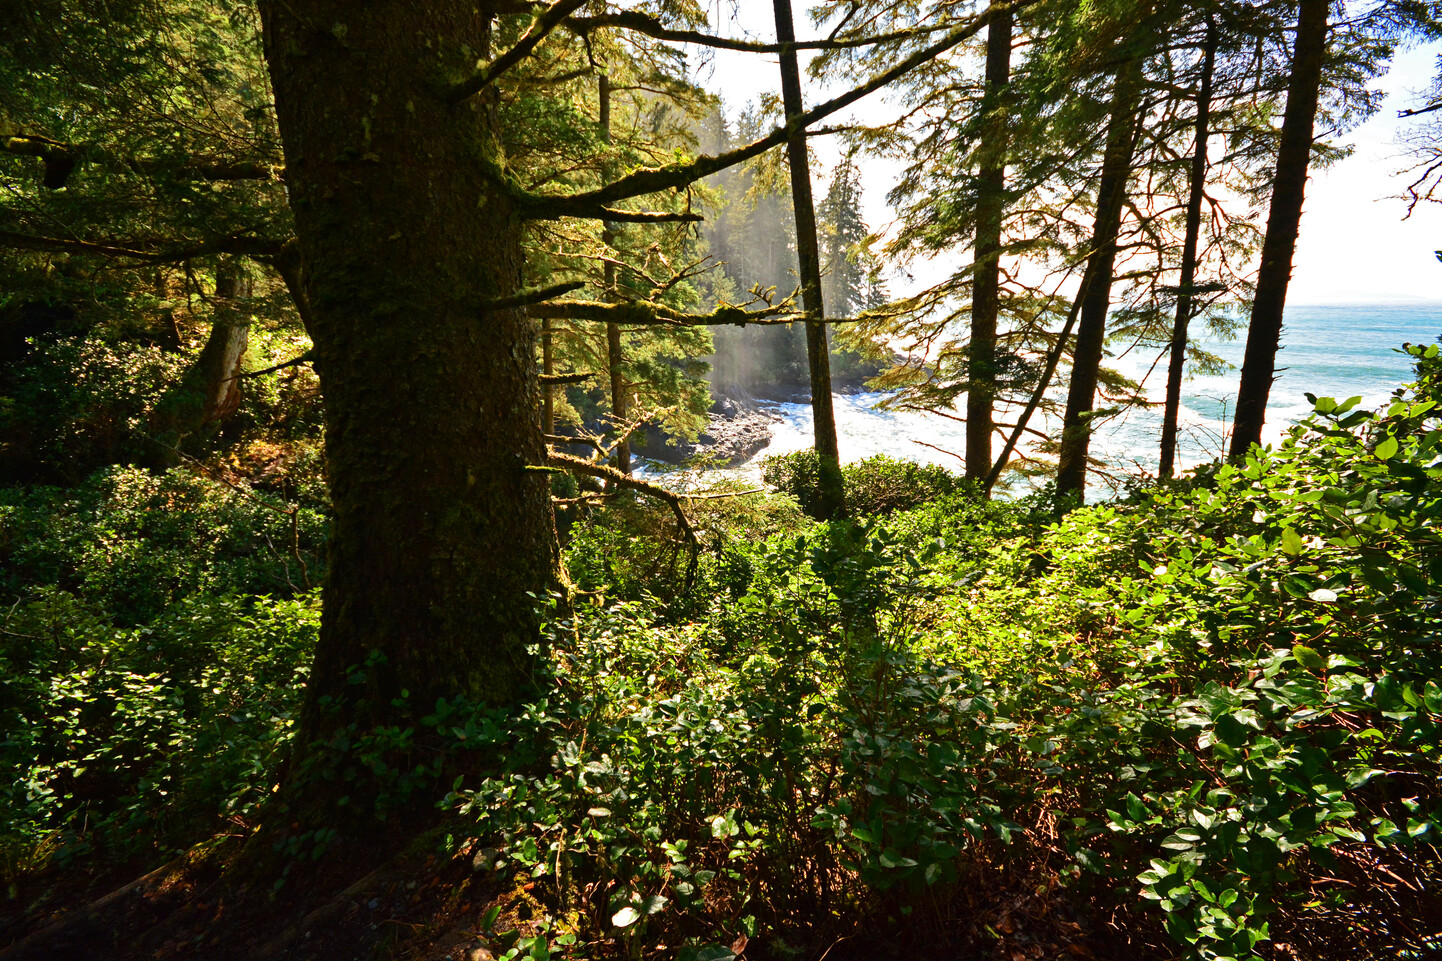 View of inlet / bay through forest trees. Photo credit: Iain Robert Reid